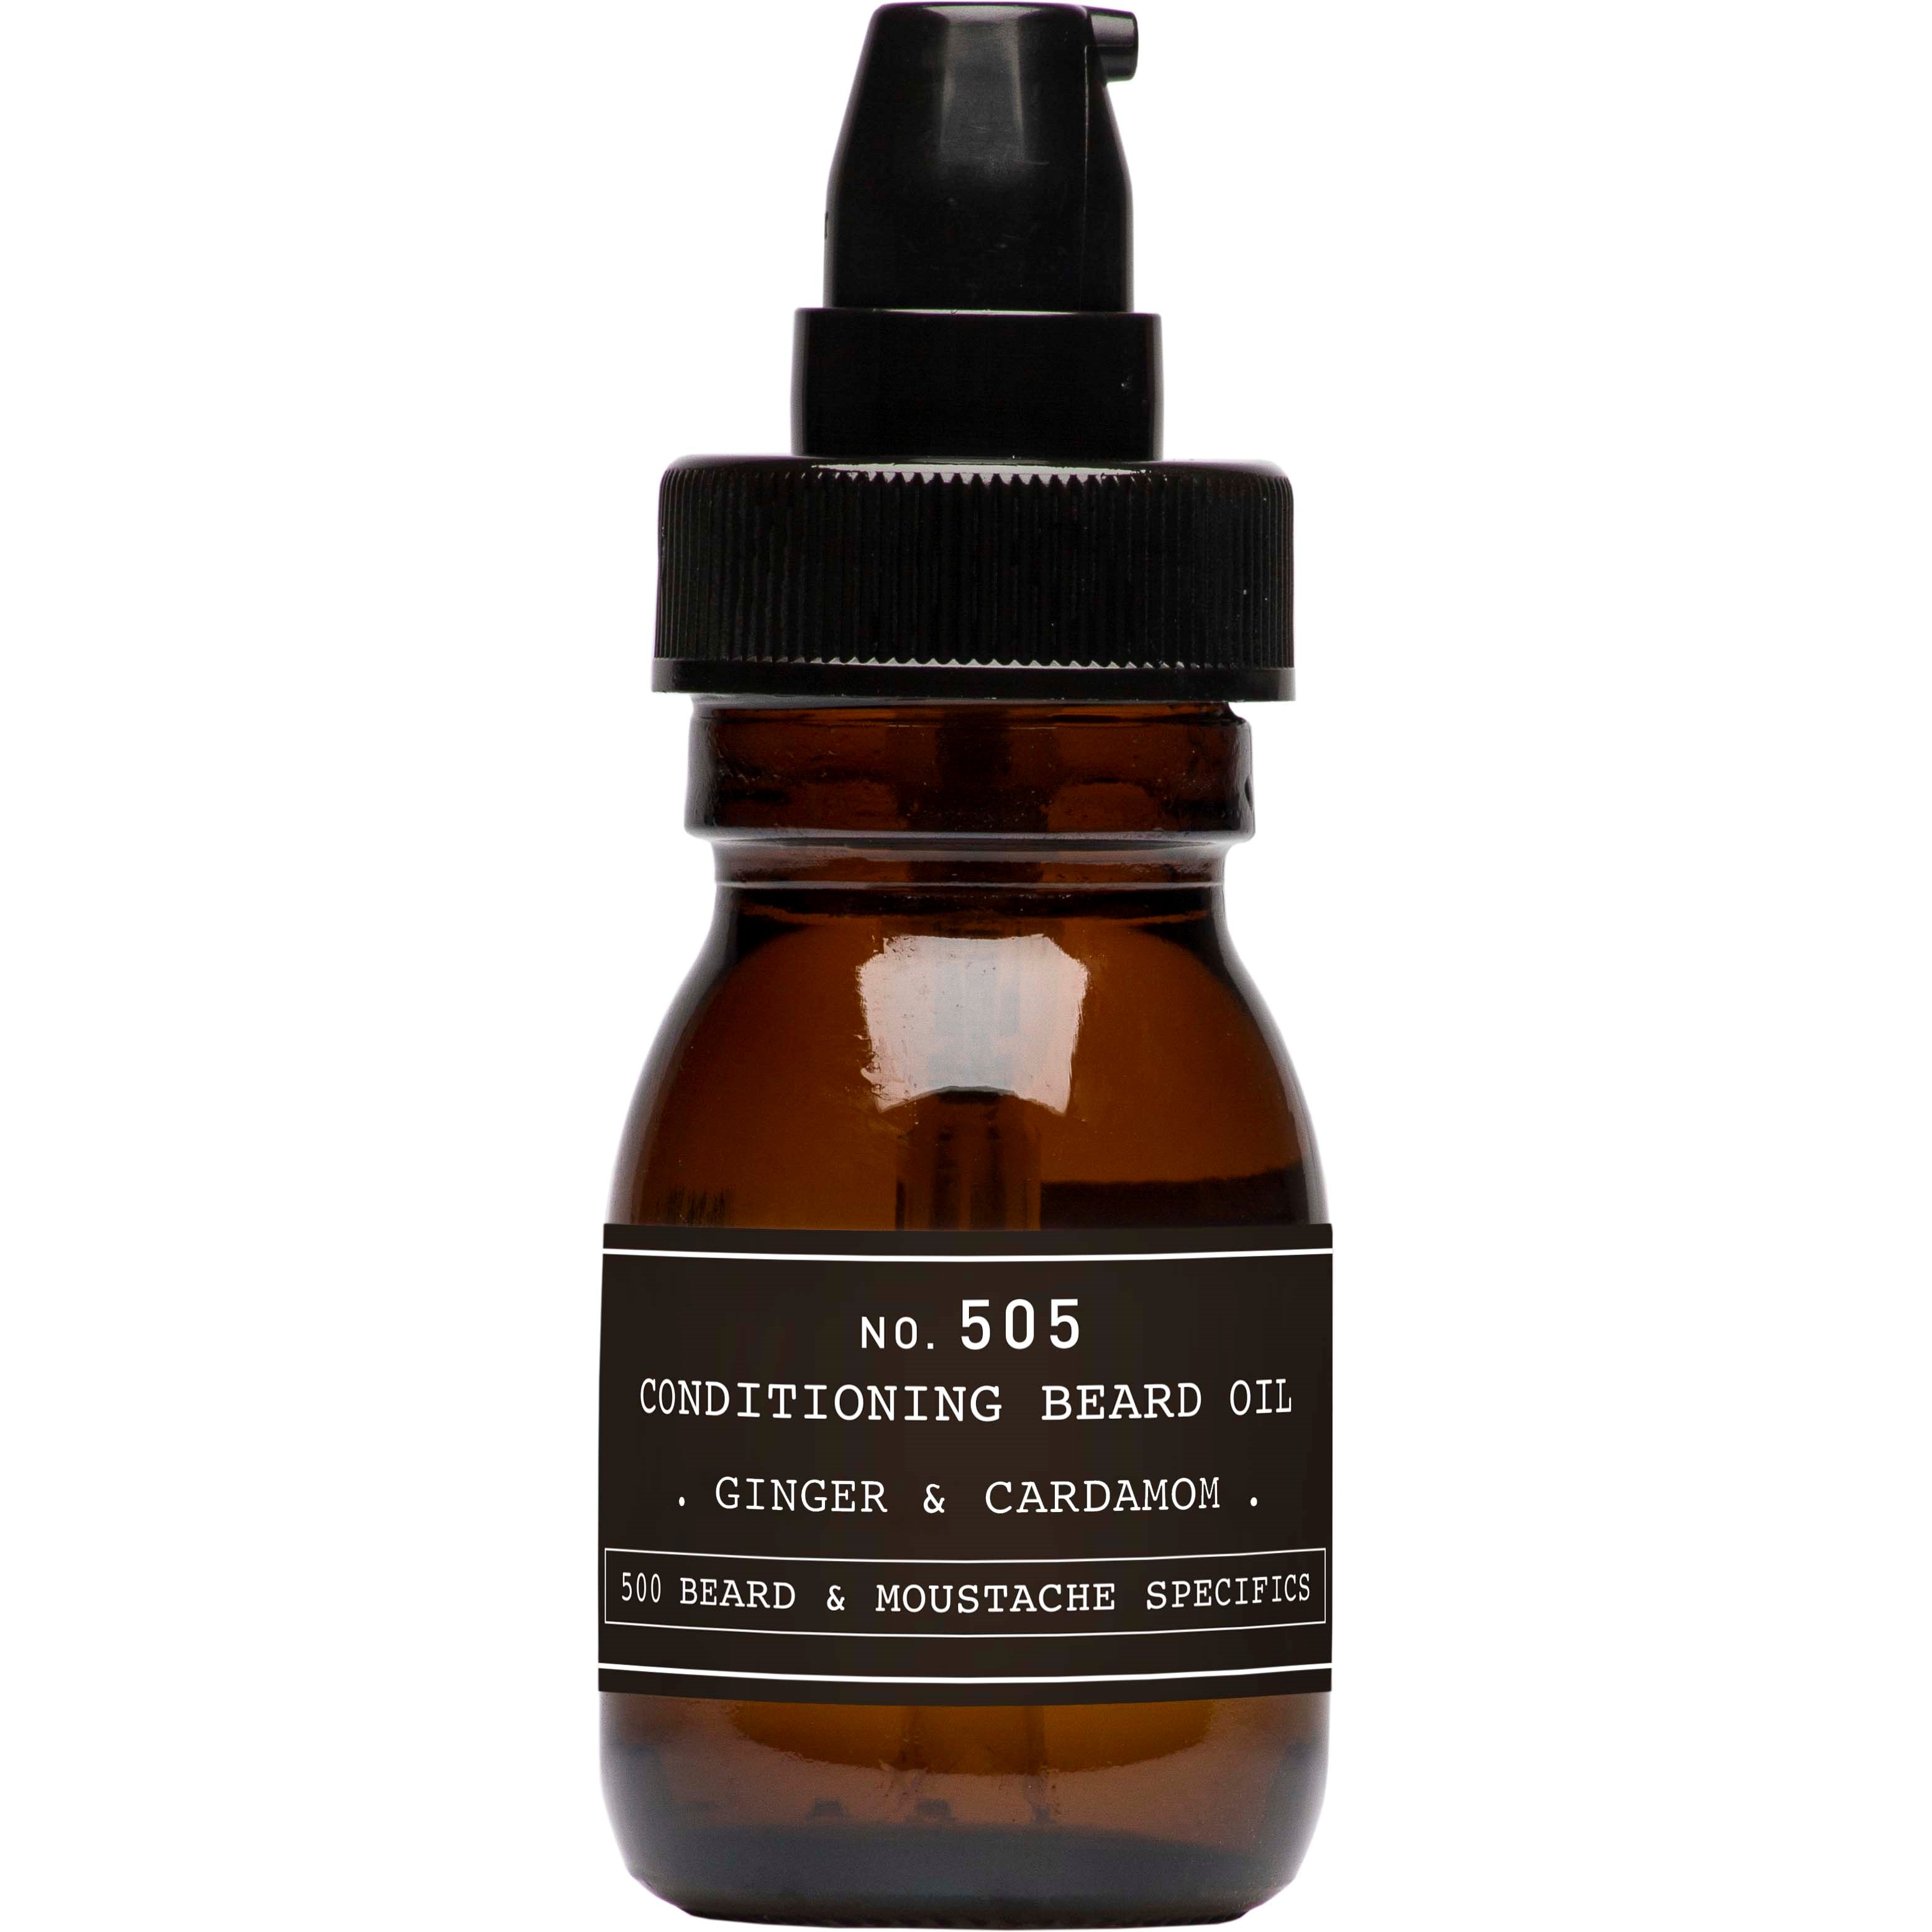 DEPOT MALE TOOLS No. 505 Conditioning Beard Oil .Ginger & Cardamom 30